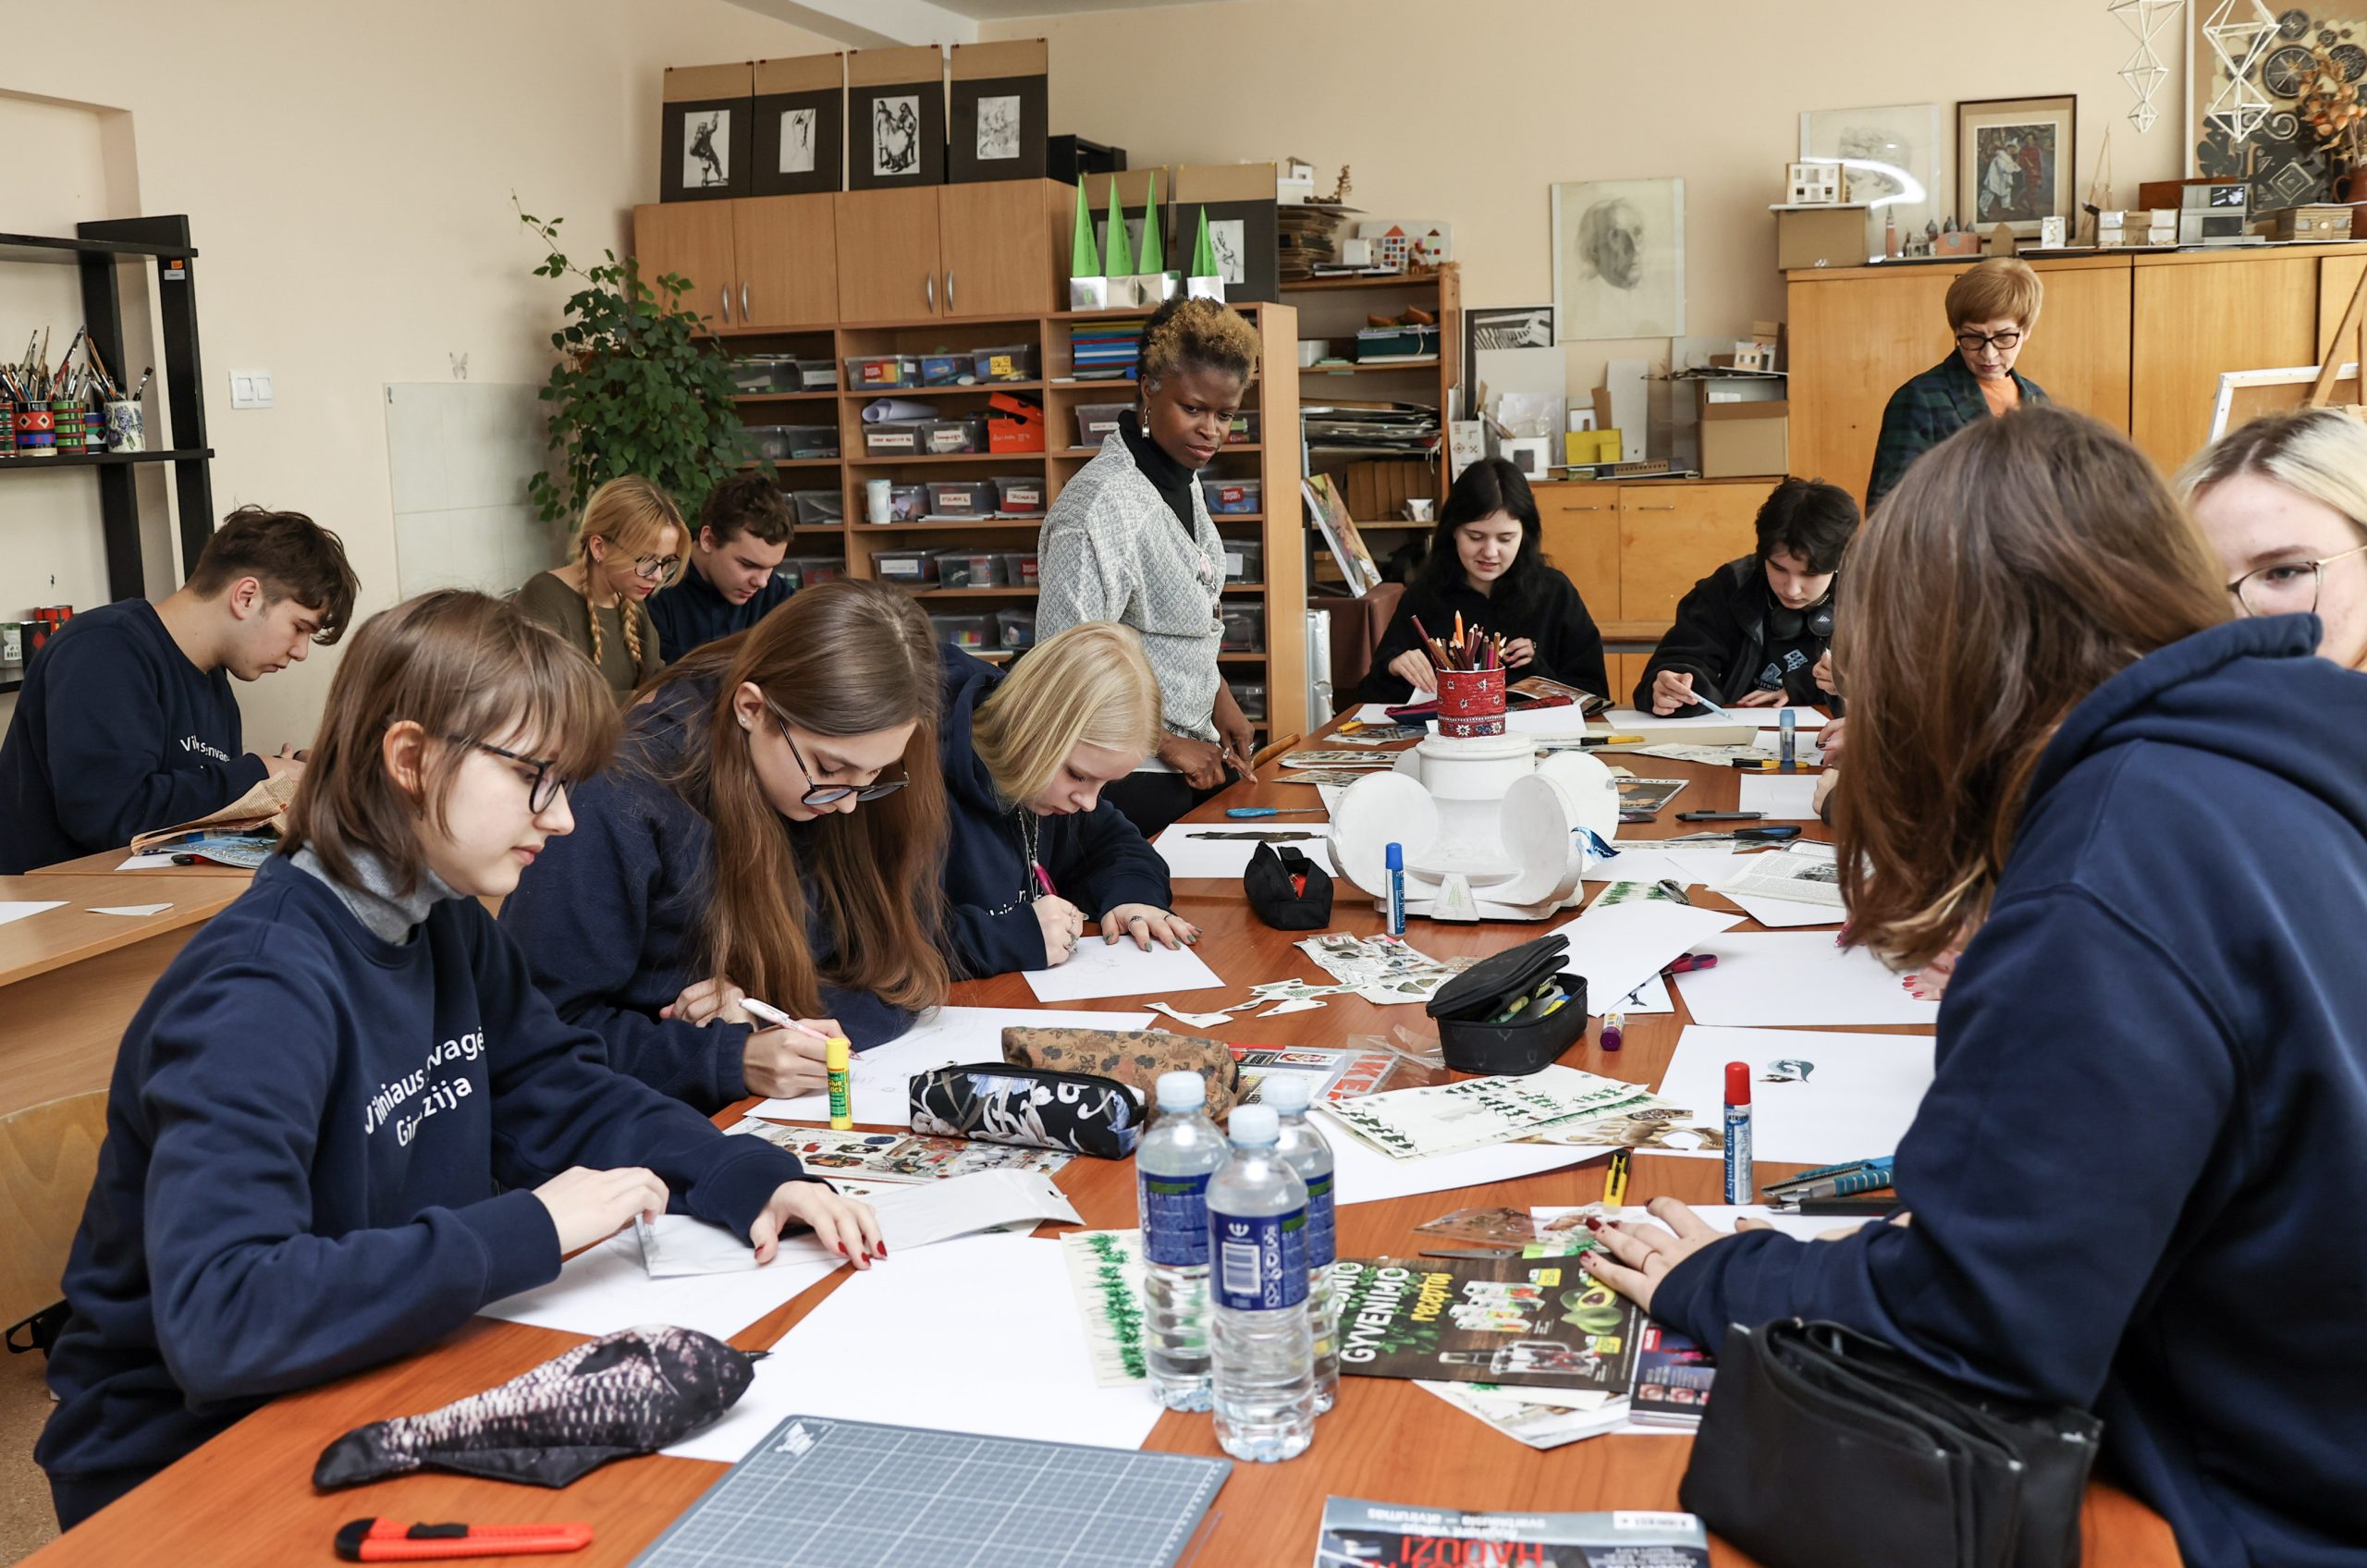 At Senvagė High School, Charlton worked with local graffiti artist Antanas Repečka to conduct a collage workshop with students.